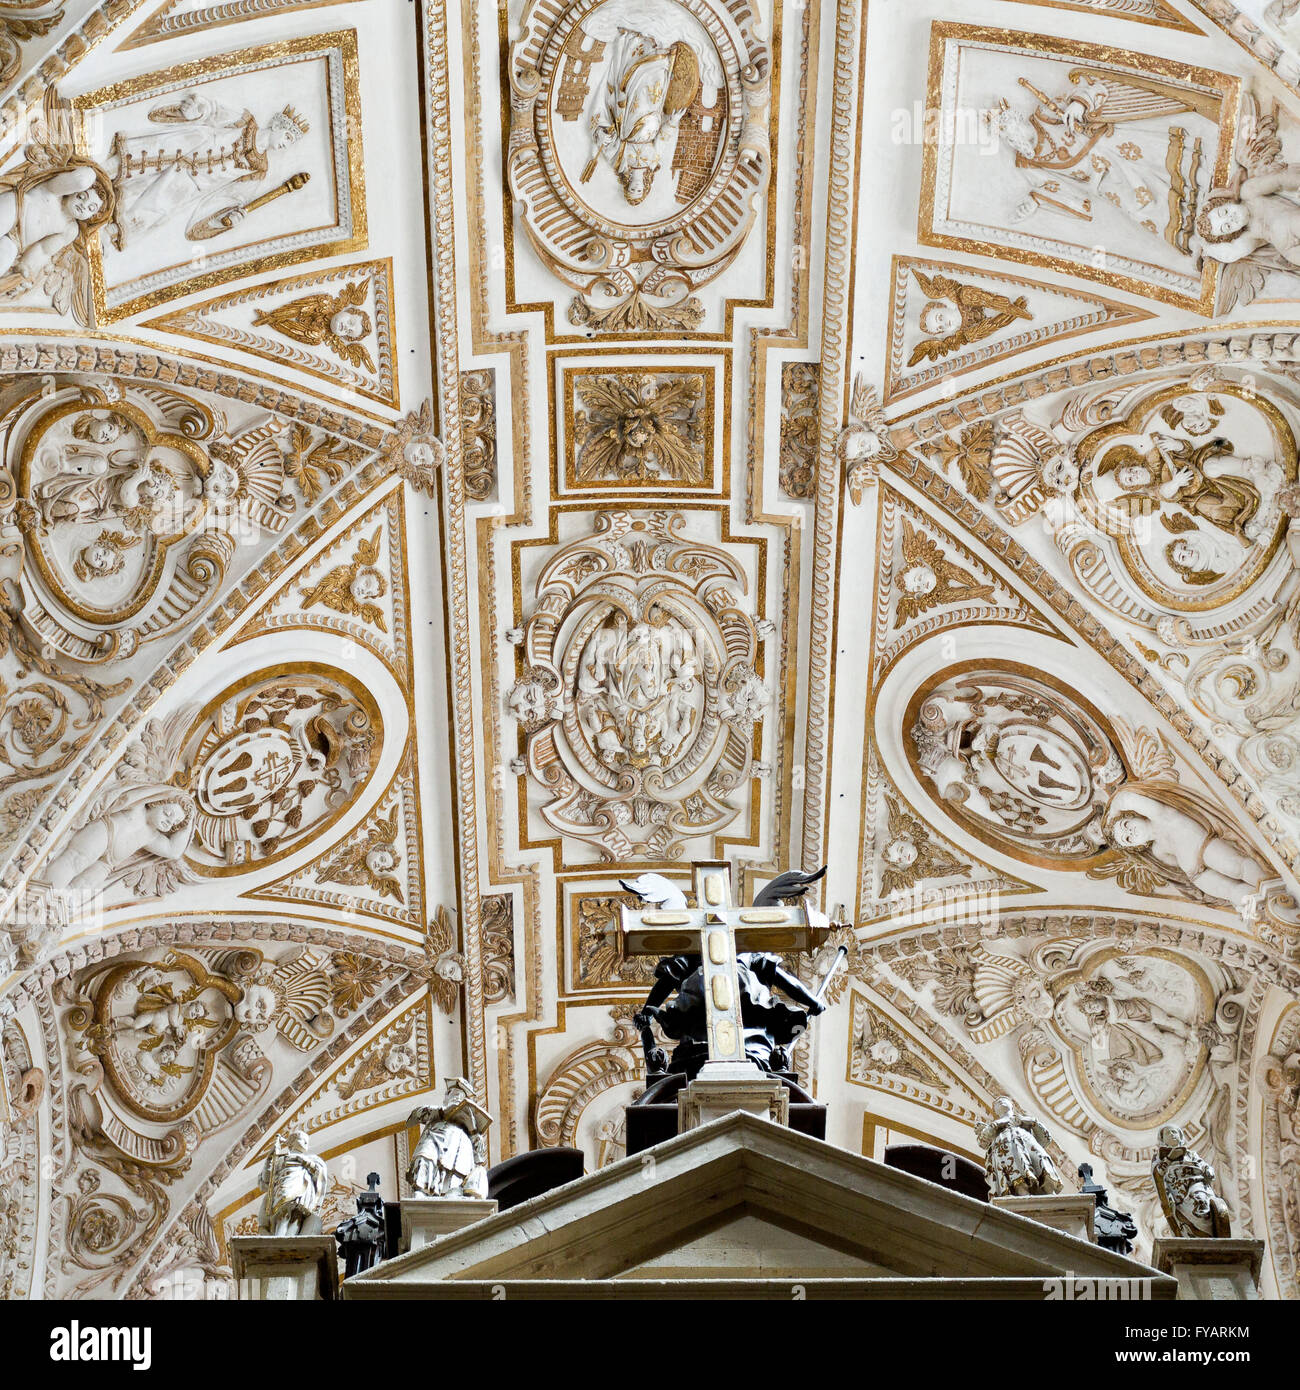 Detail of the transept ceiling of the Cathedral in Cordoba, Spain Stock Photo